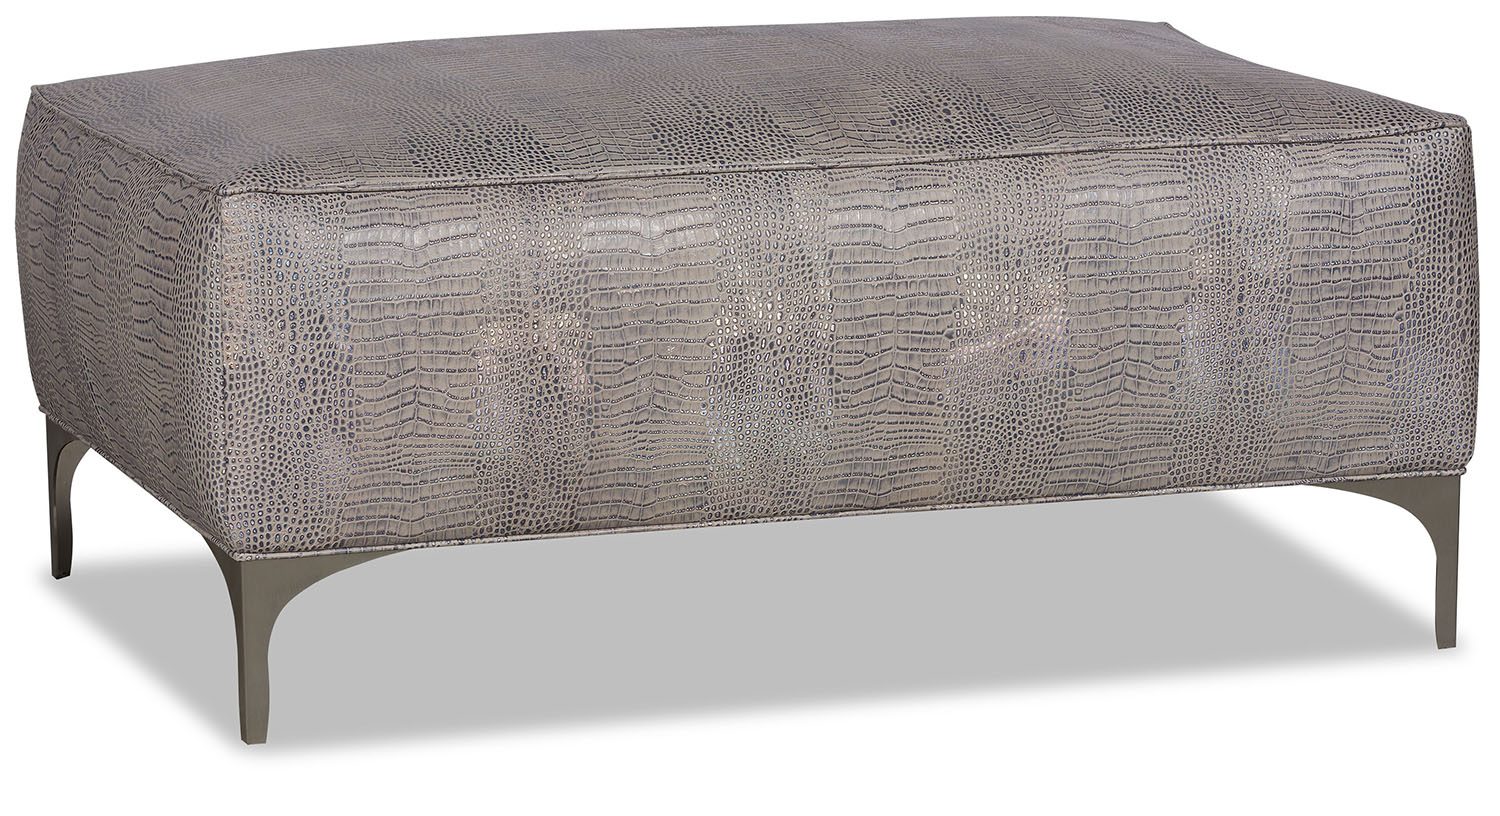 93-11 RECT 37 TO 42 INCH WIDE – OTTOMAN SHOP